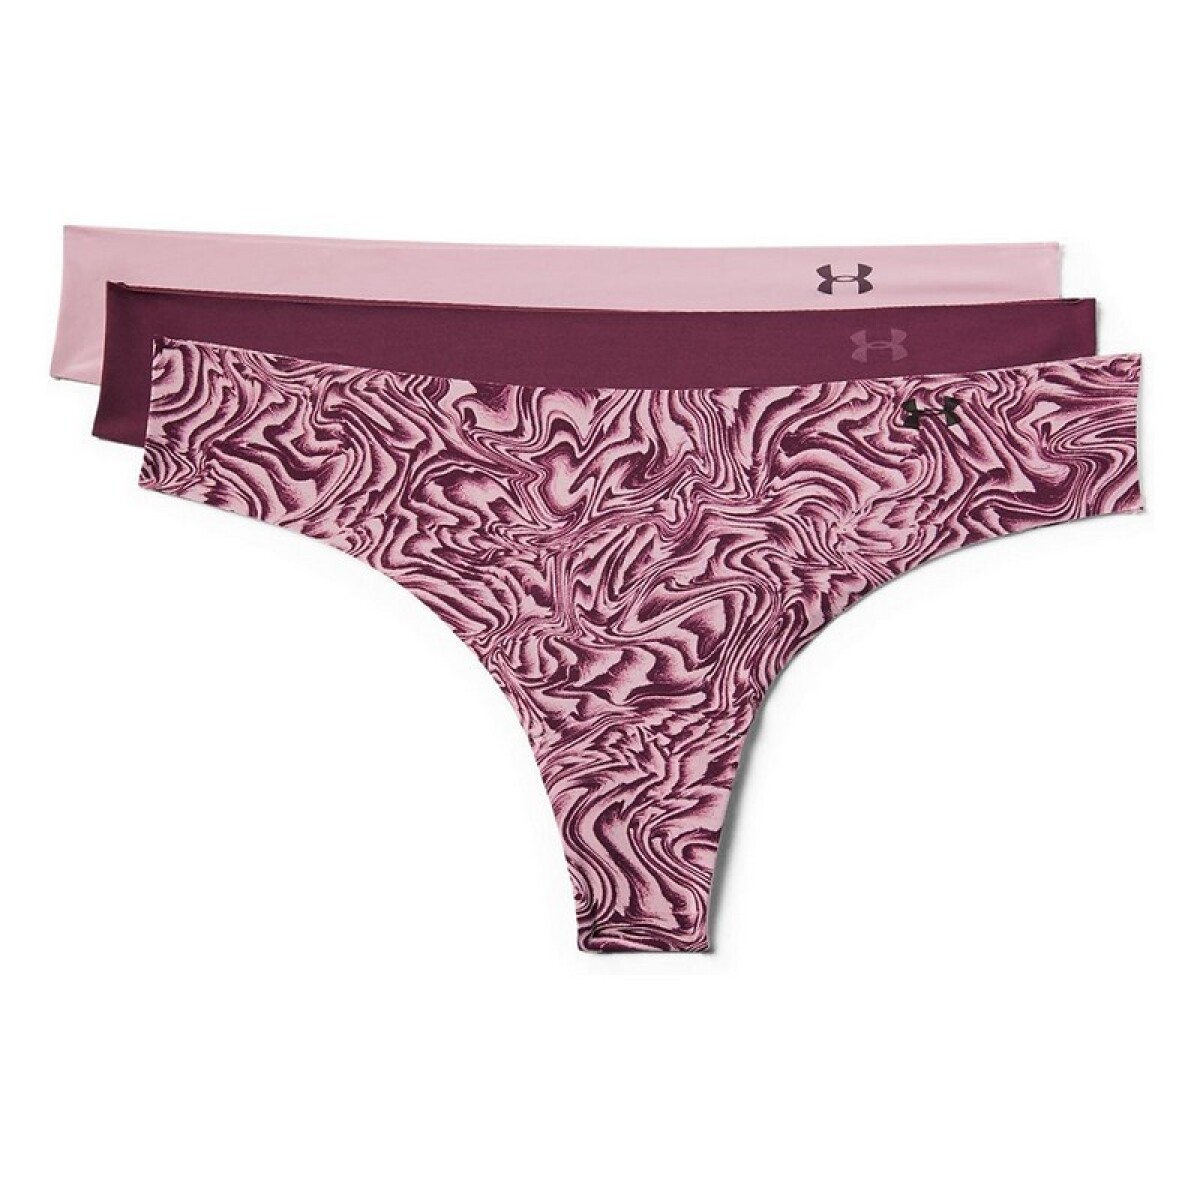 Bombacha Under Armour Thong Pack 3 - Rosa 